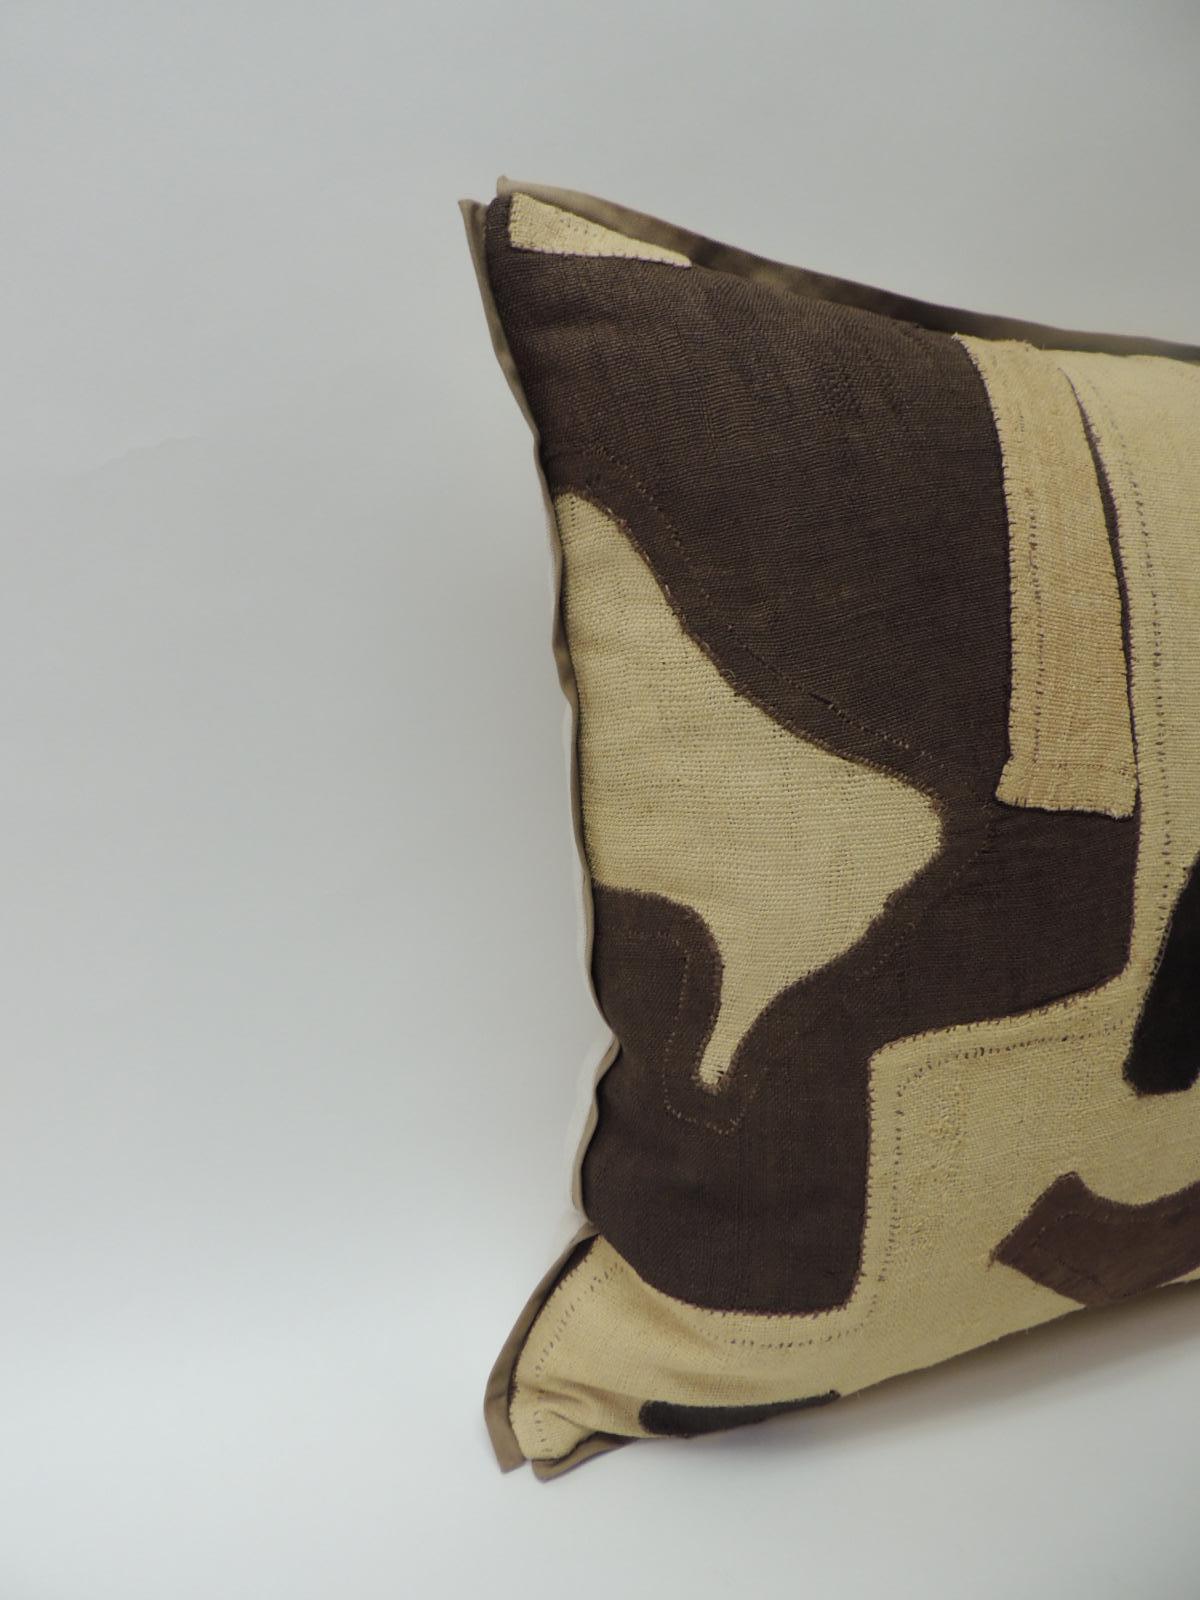 Applique raffia, patchwork and applique brown, black and natural decorative pillow,
Custom flat cotton trim in earth-tone khaki color all around. Natural Cotton and linen backing.  Pillow hand-crafted and designed in the USA with custom made